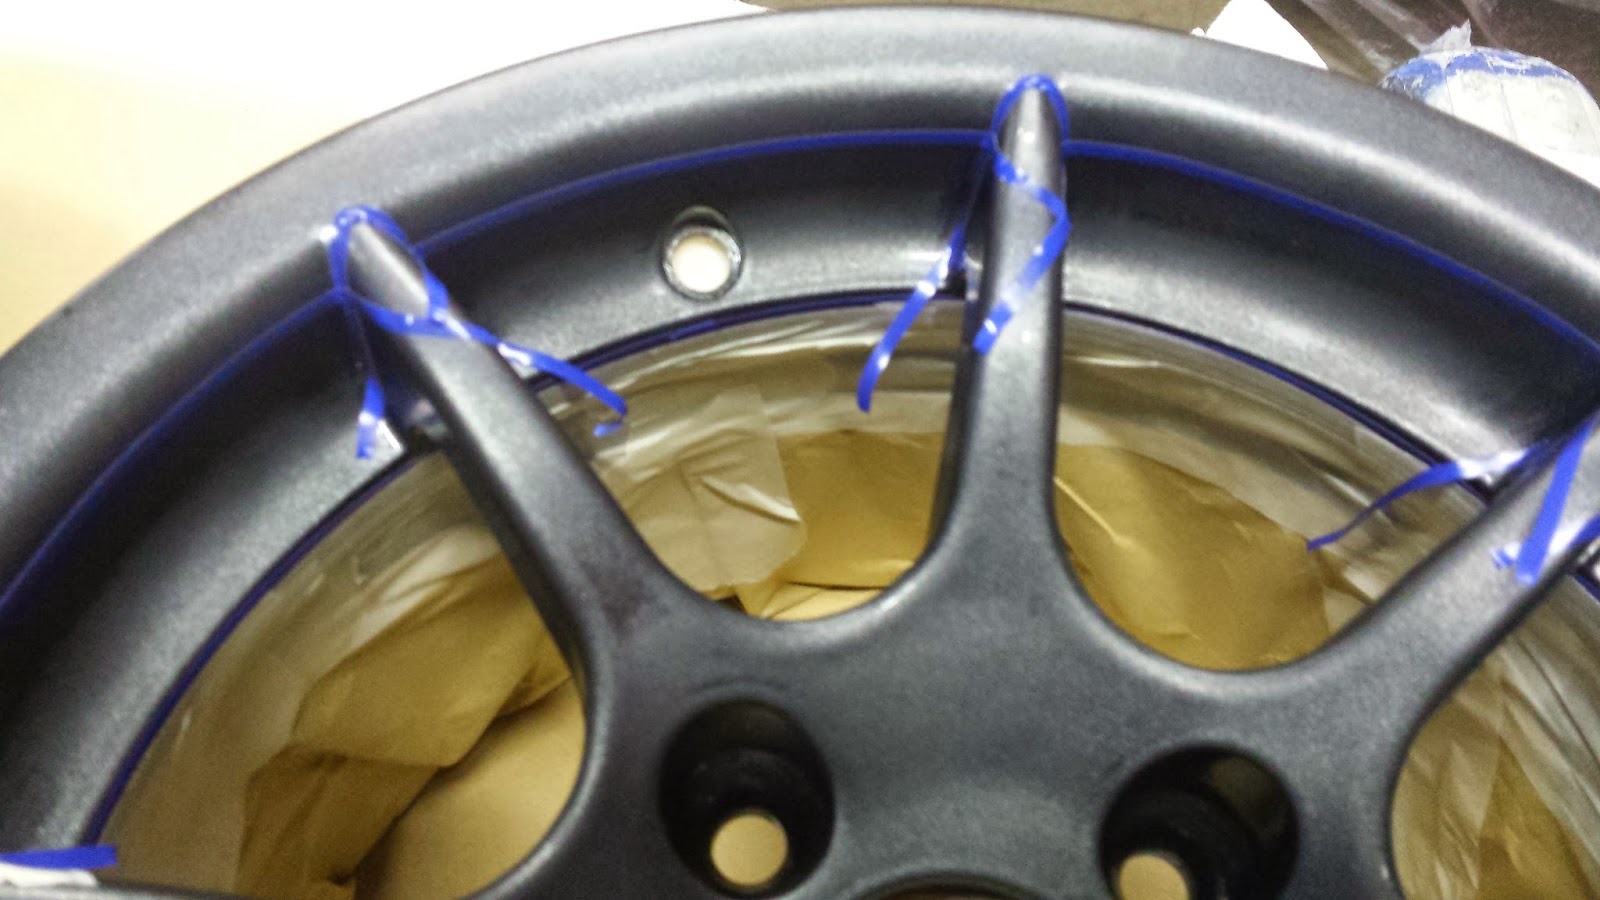 Masking around where the spokes meet the rim was apparently fiddly